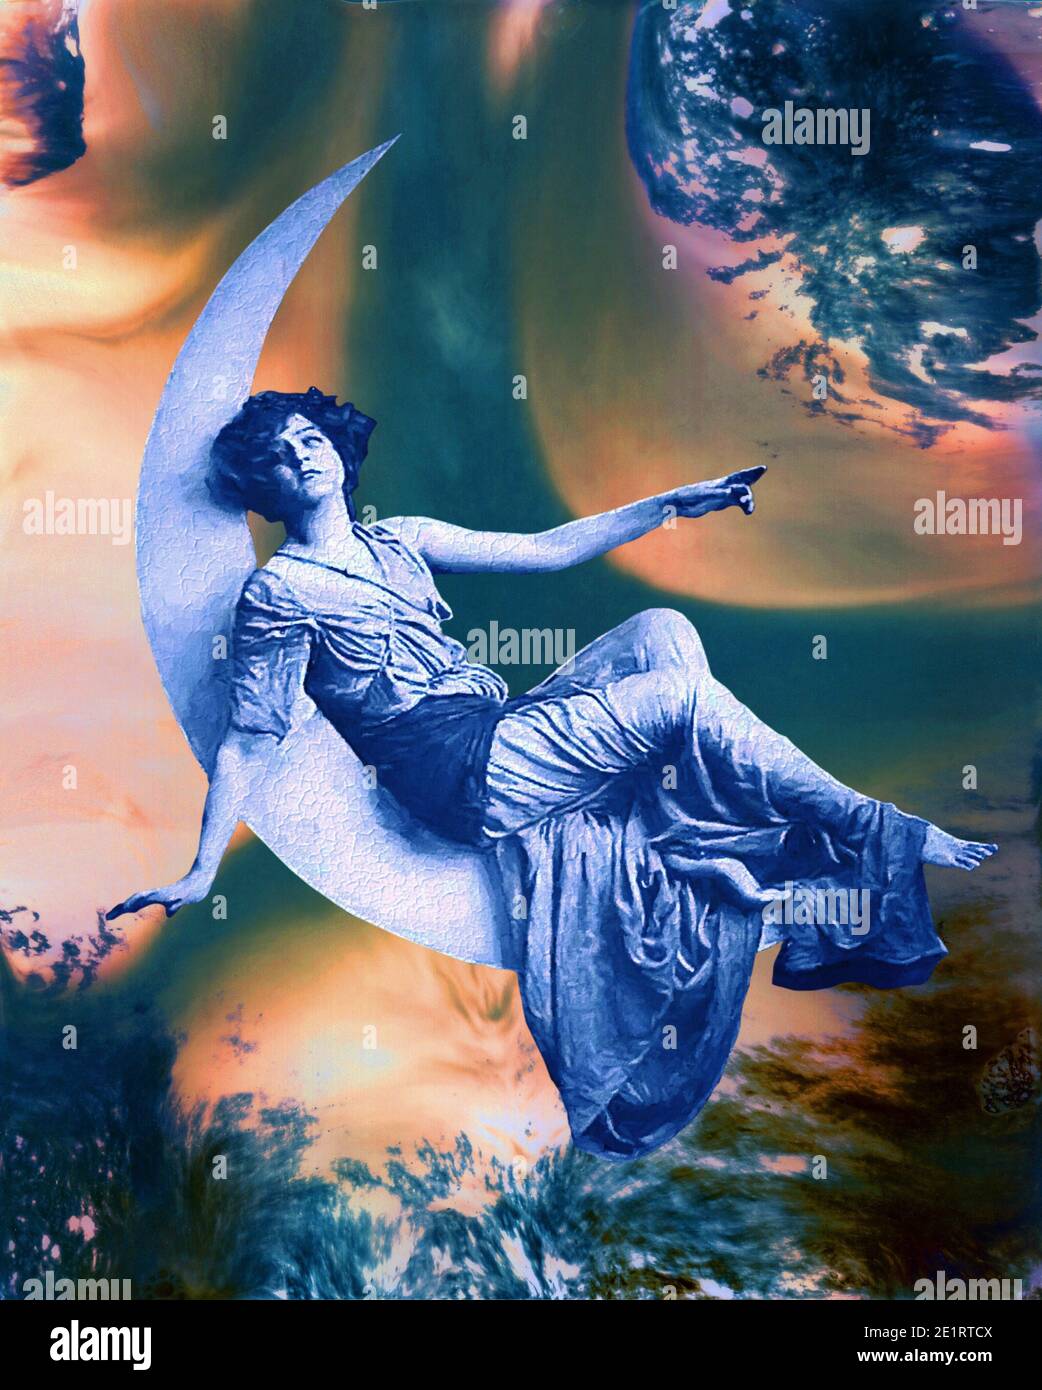 A girl sits on a moon while in the ethereal expanses of outer space.A Science Fiction image with a twist of steam punk.Pulp Fiction cover material.... Stock Photo